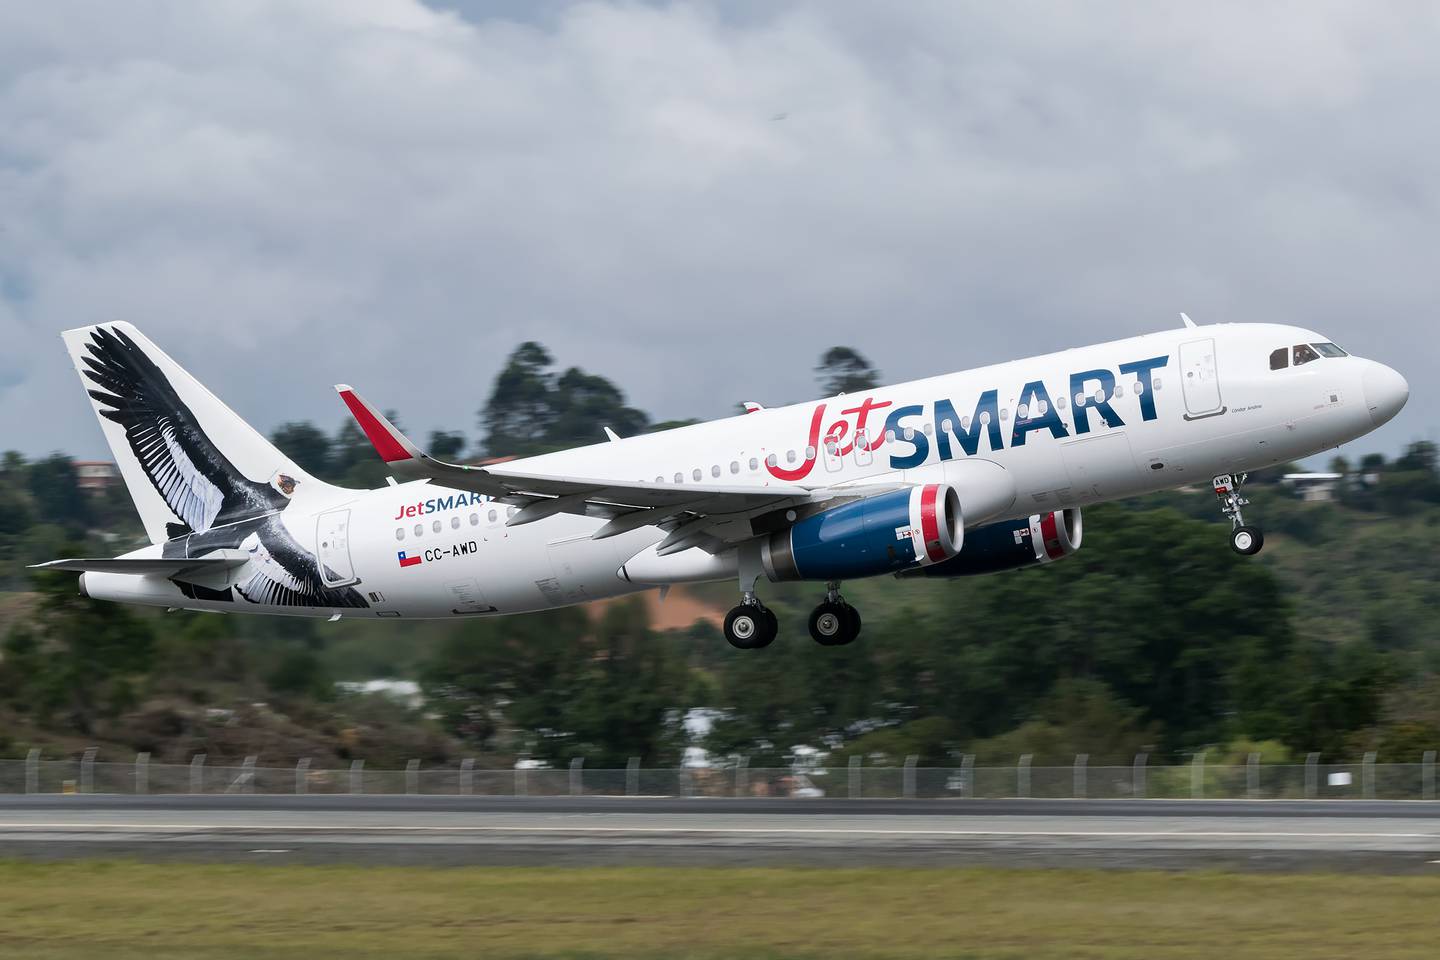 "People have understood that services are diverse according to the needs of each passenger," according to Estuardo Ortiz, CEO of JetSmart.dfd